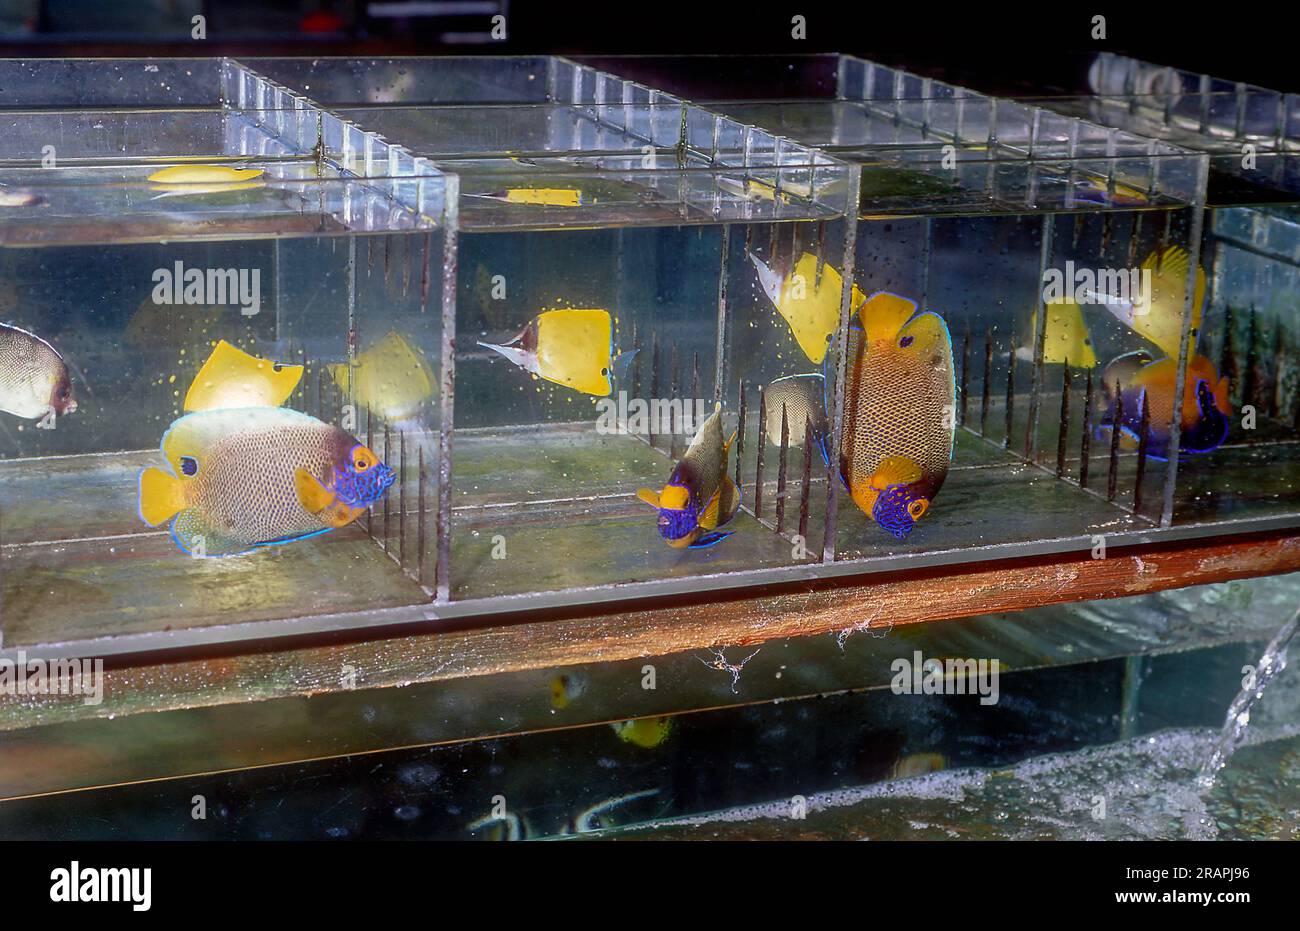 Yellowfaced angelfishes (Pomacanthus xanthometopod) and Longnose butterflyfishes (Forcipiger longirostris) being held in small tanks prior to export a Stock Photo